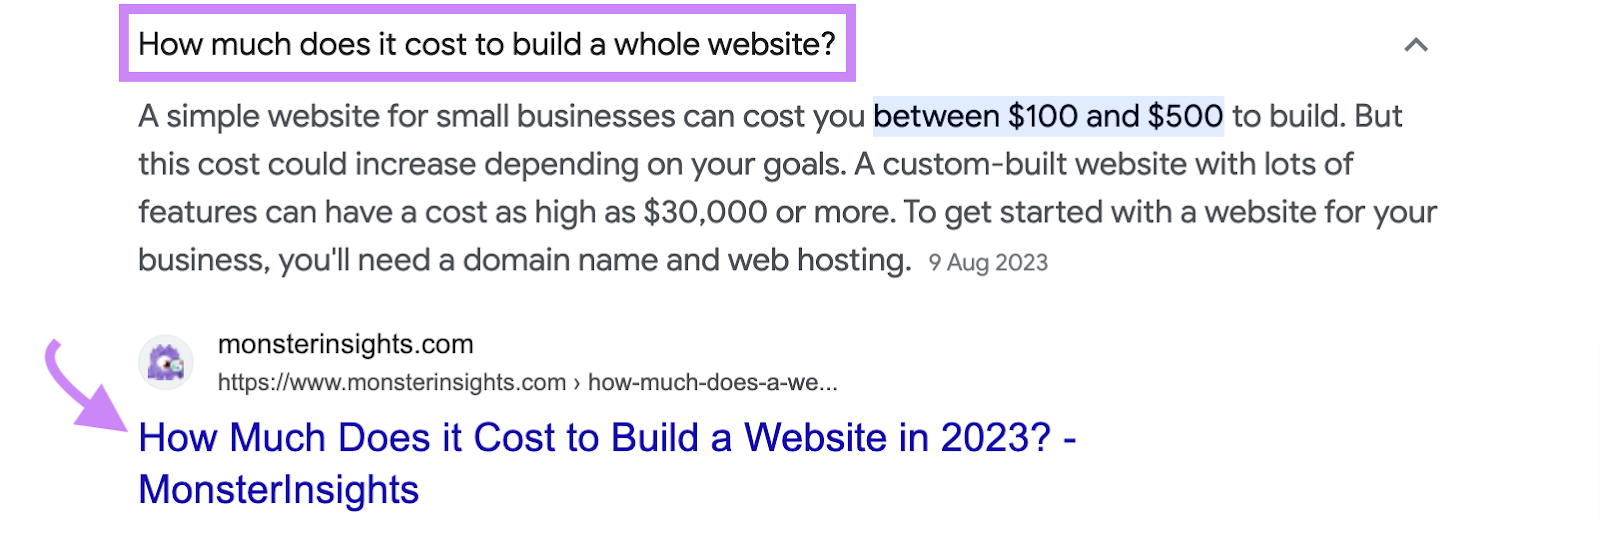 “More to Ask” section for the keyword “how to build a website"